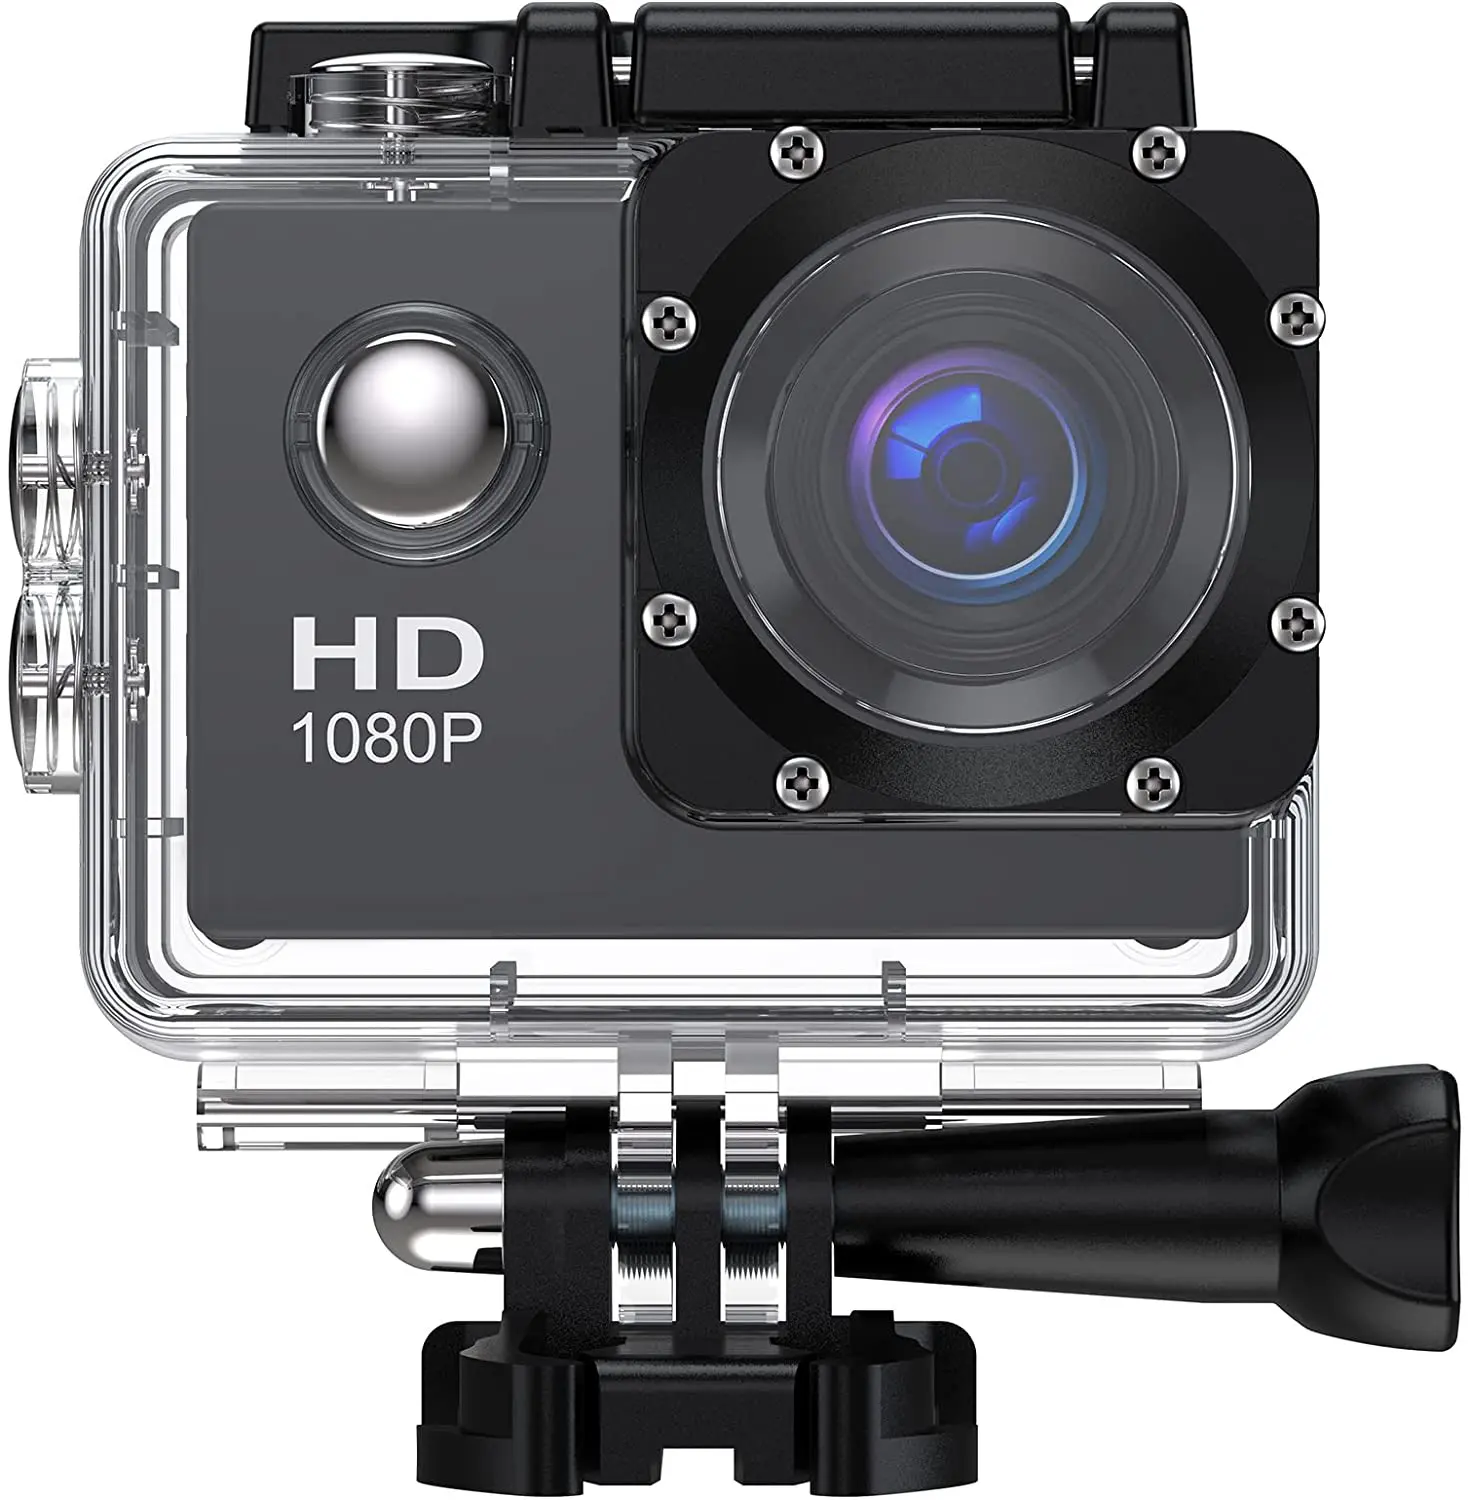 Action Camera HD1080P Motion Cam Video Camcorder Waterproof DV Bike Sports Camera Outdoors Underwater Dive Camera Accessories